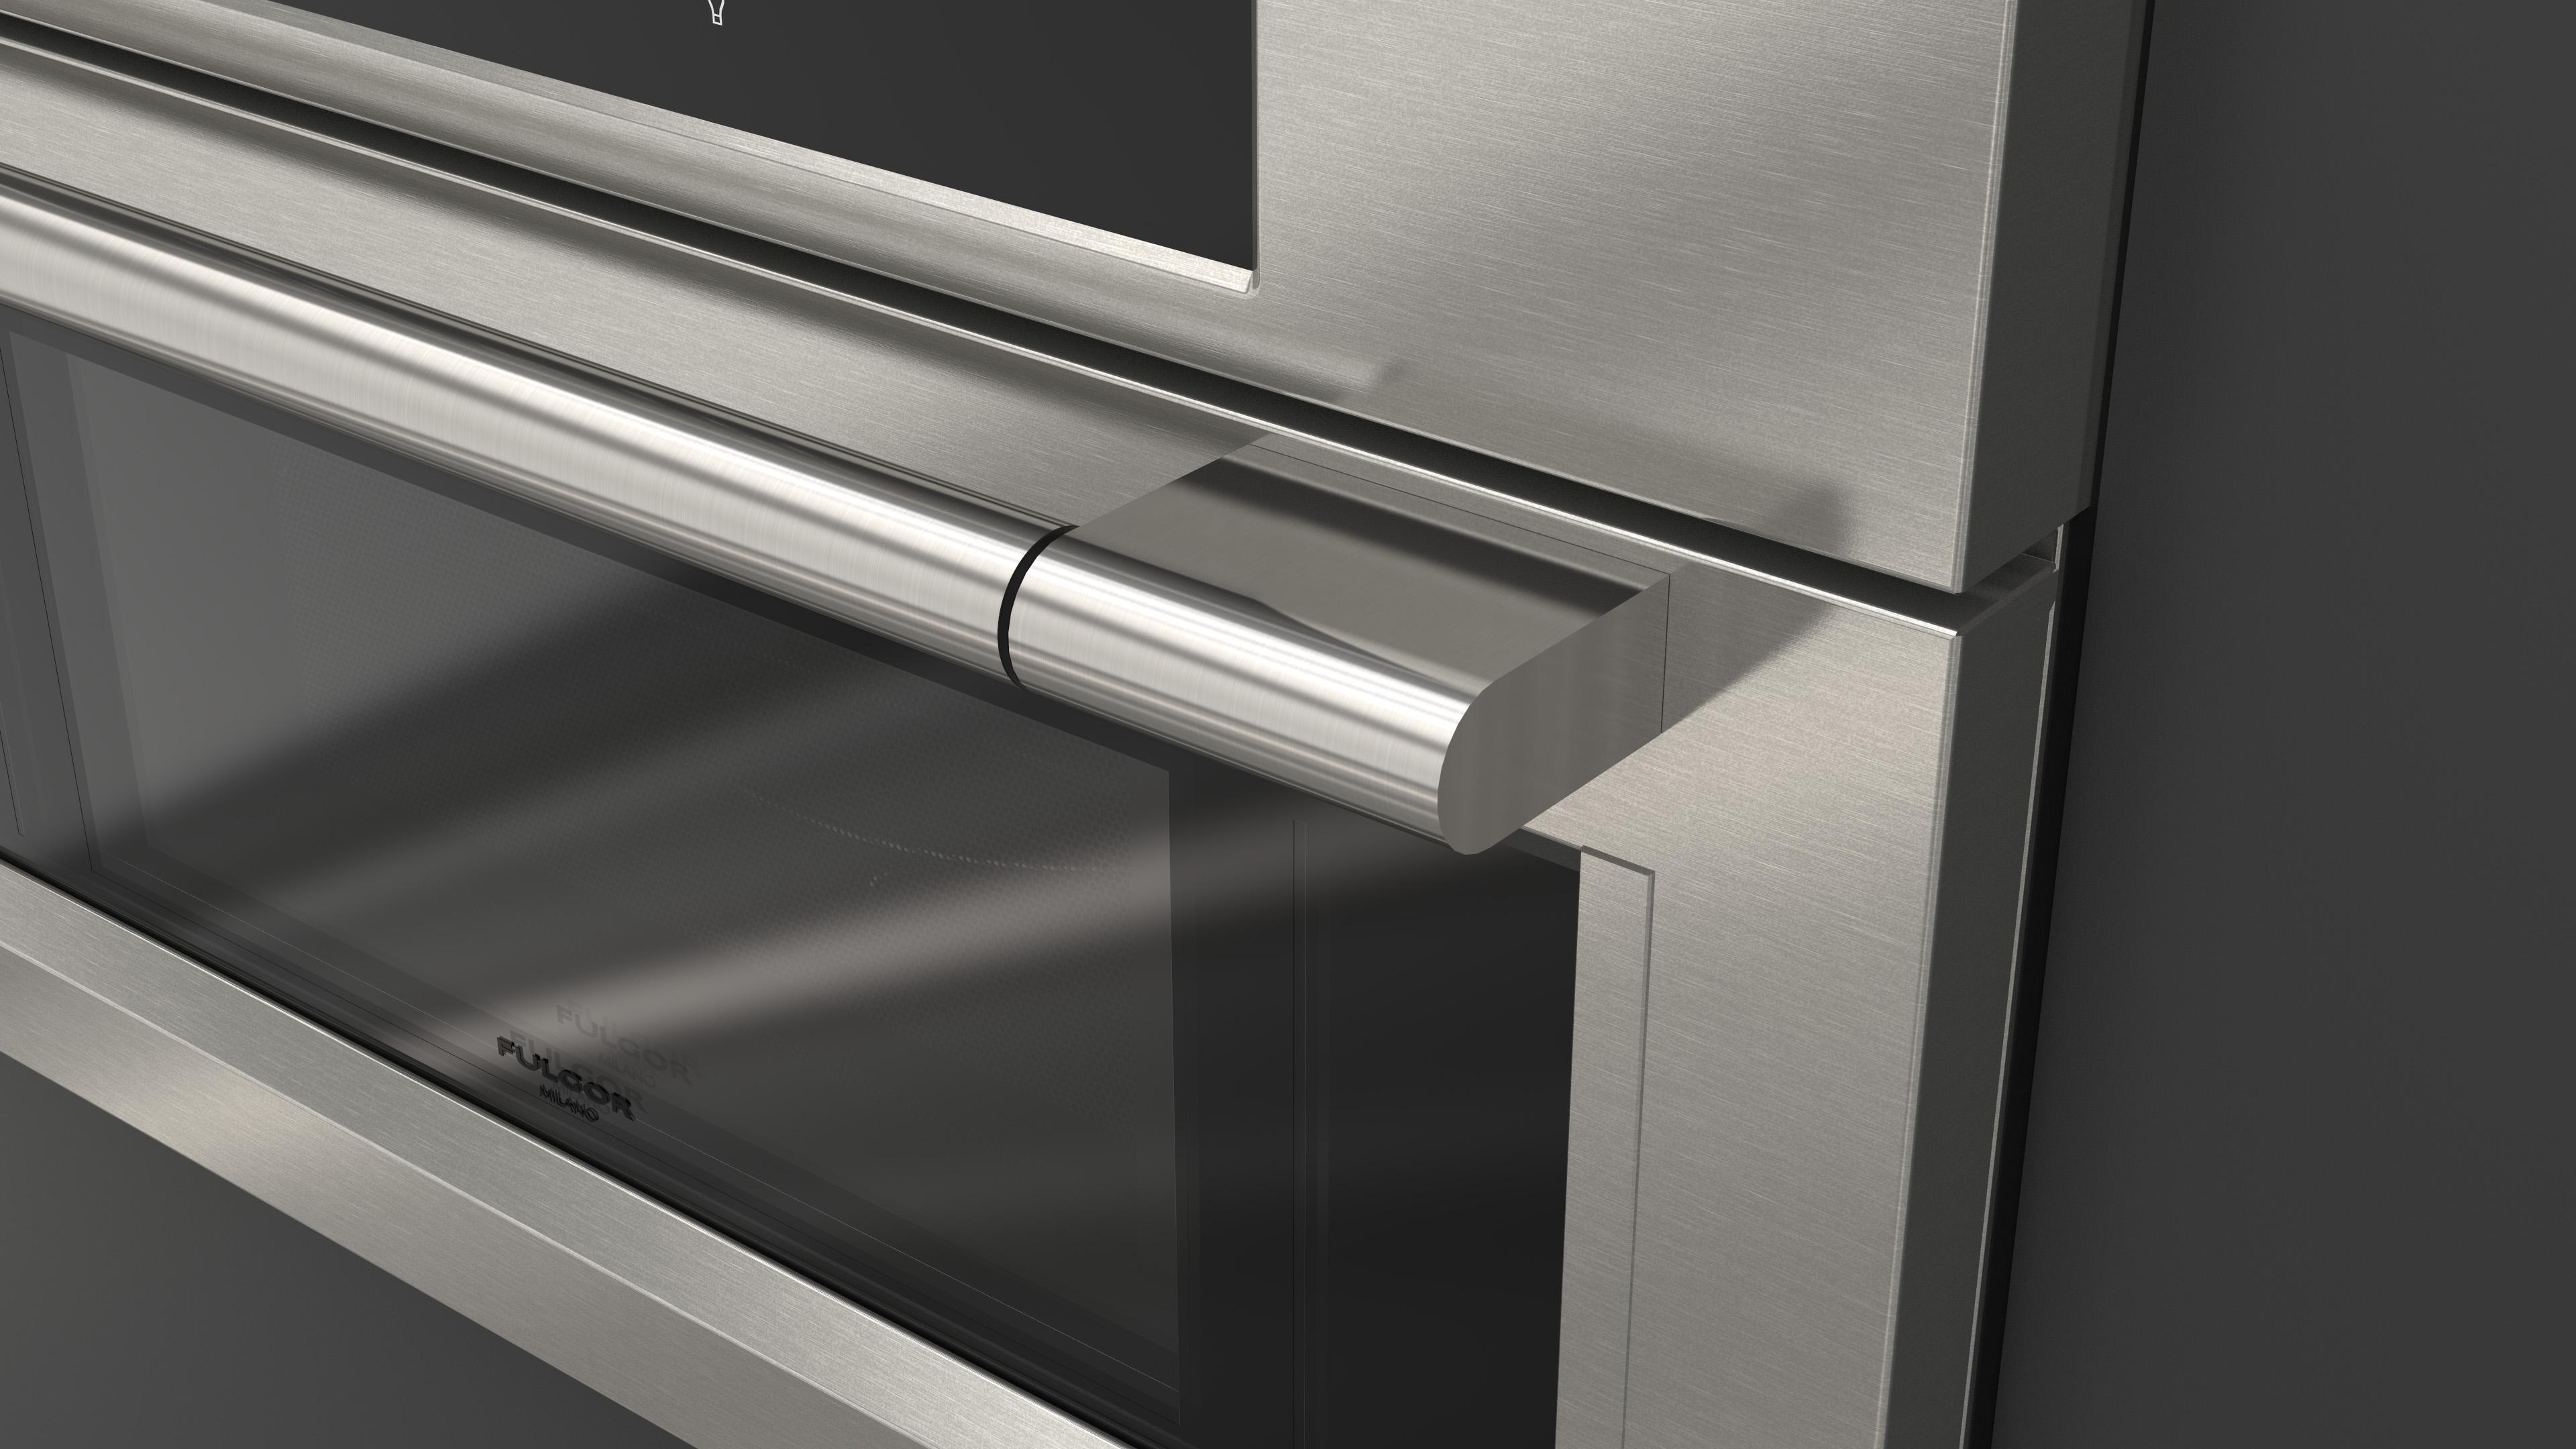 Explore Your Oven Options with Fulgor Milano Speed Ovens & Steam Ovens 4